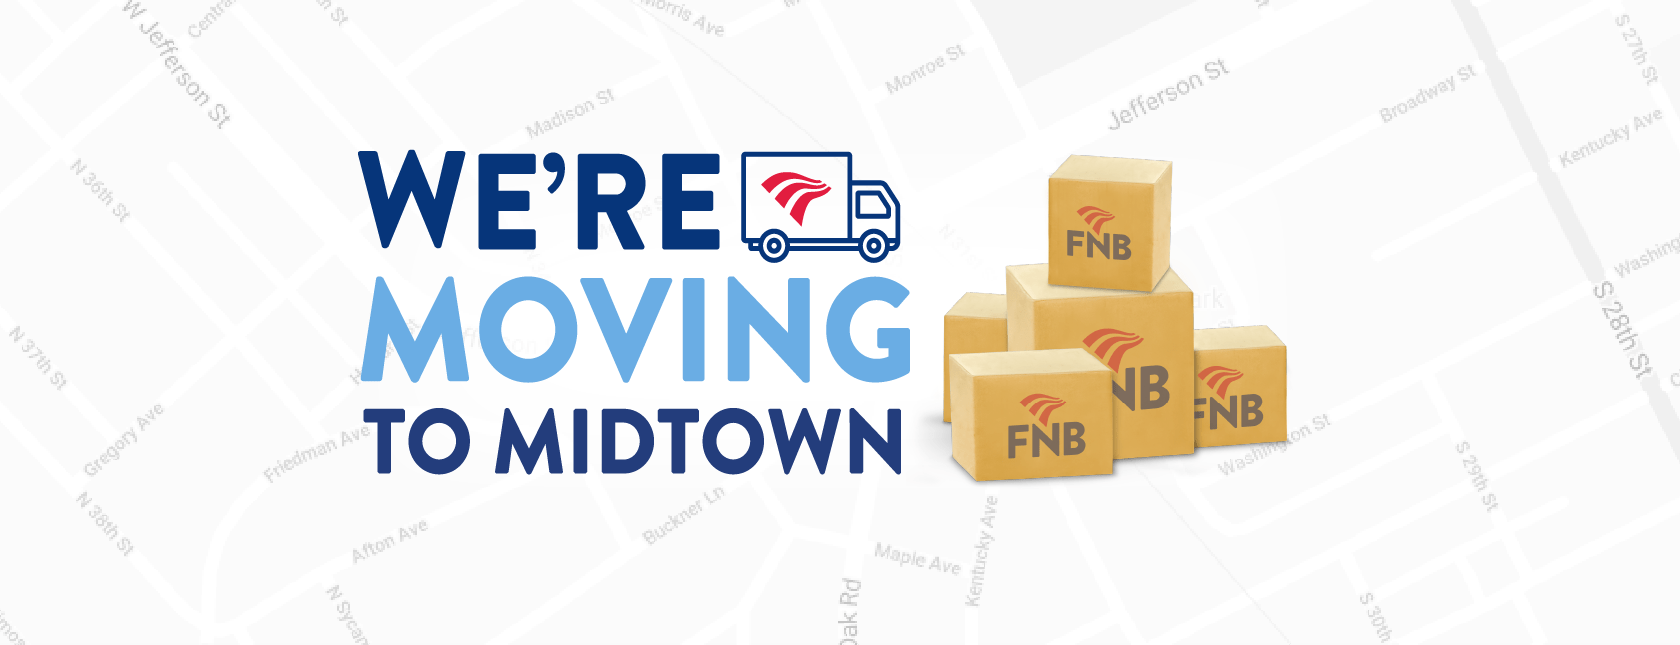 fnb-moving-to-midtown-header